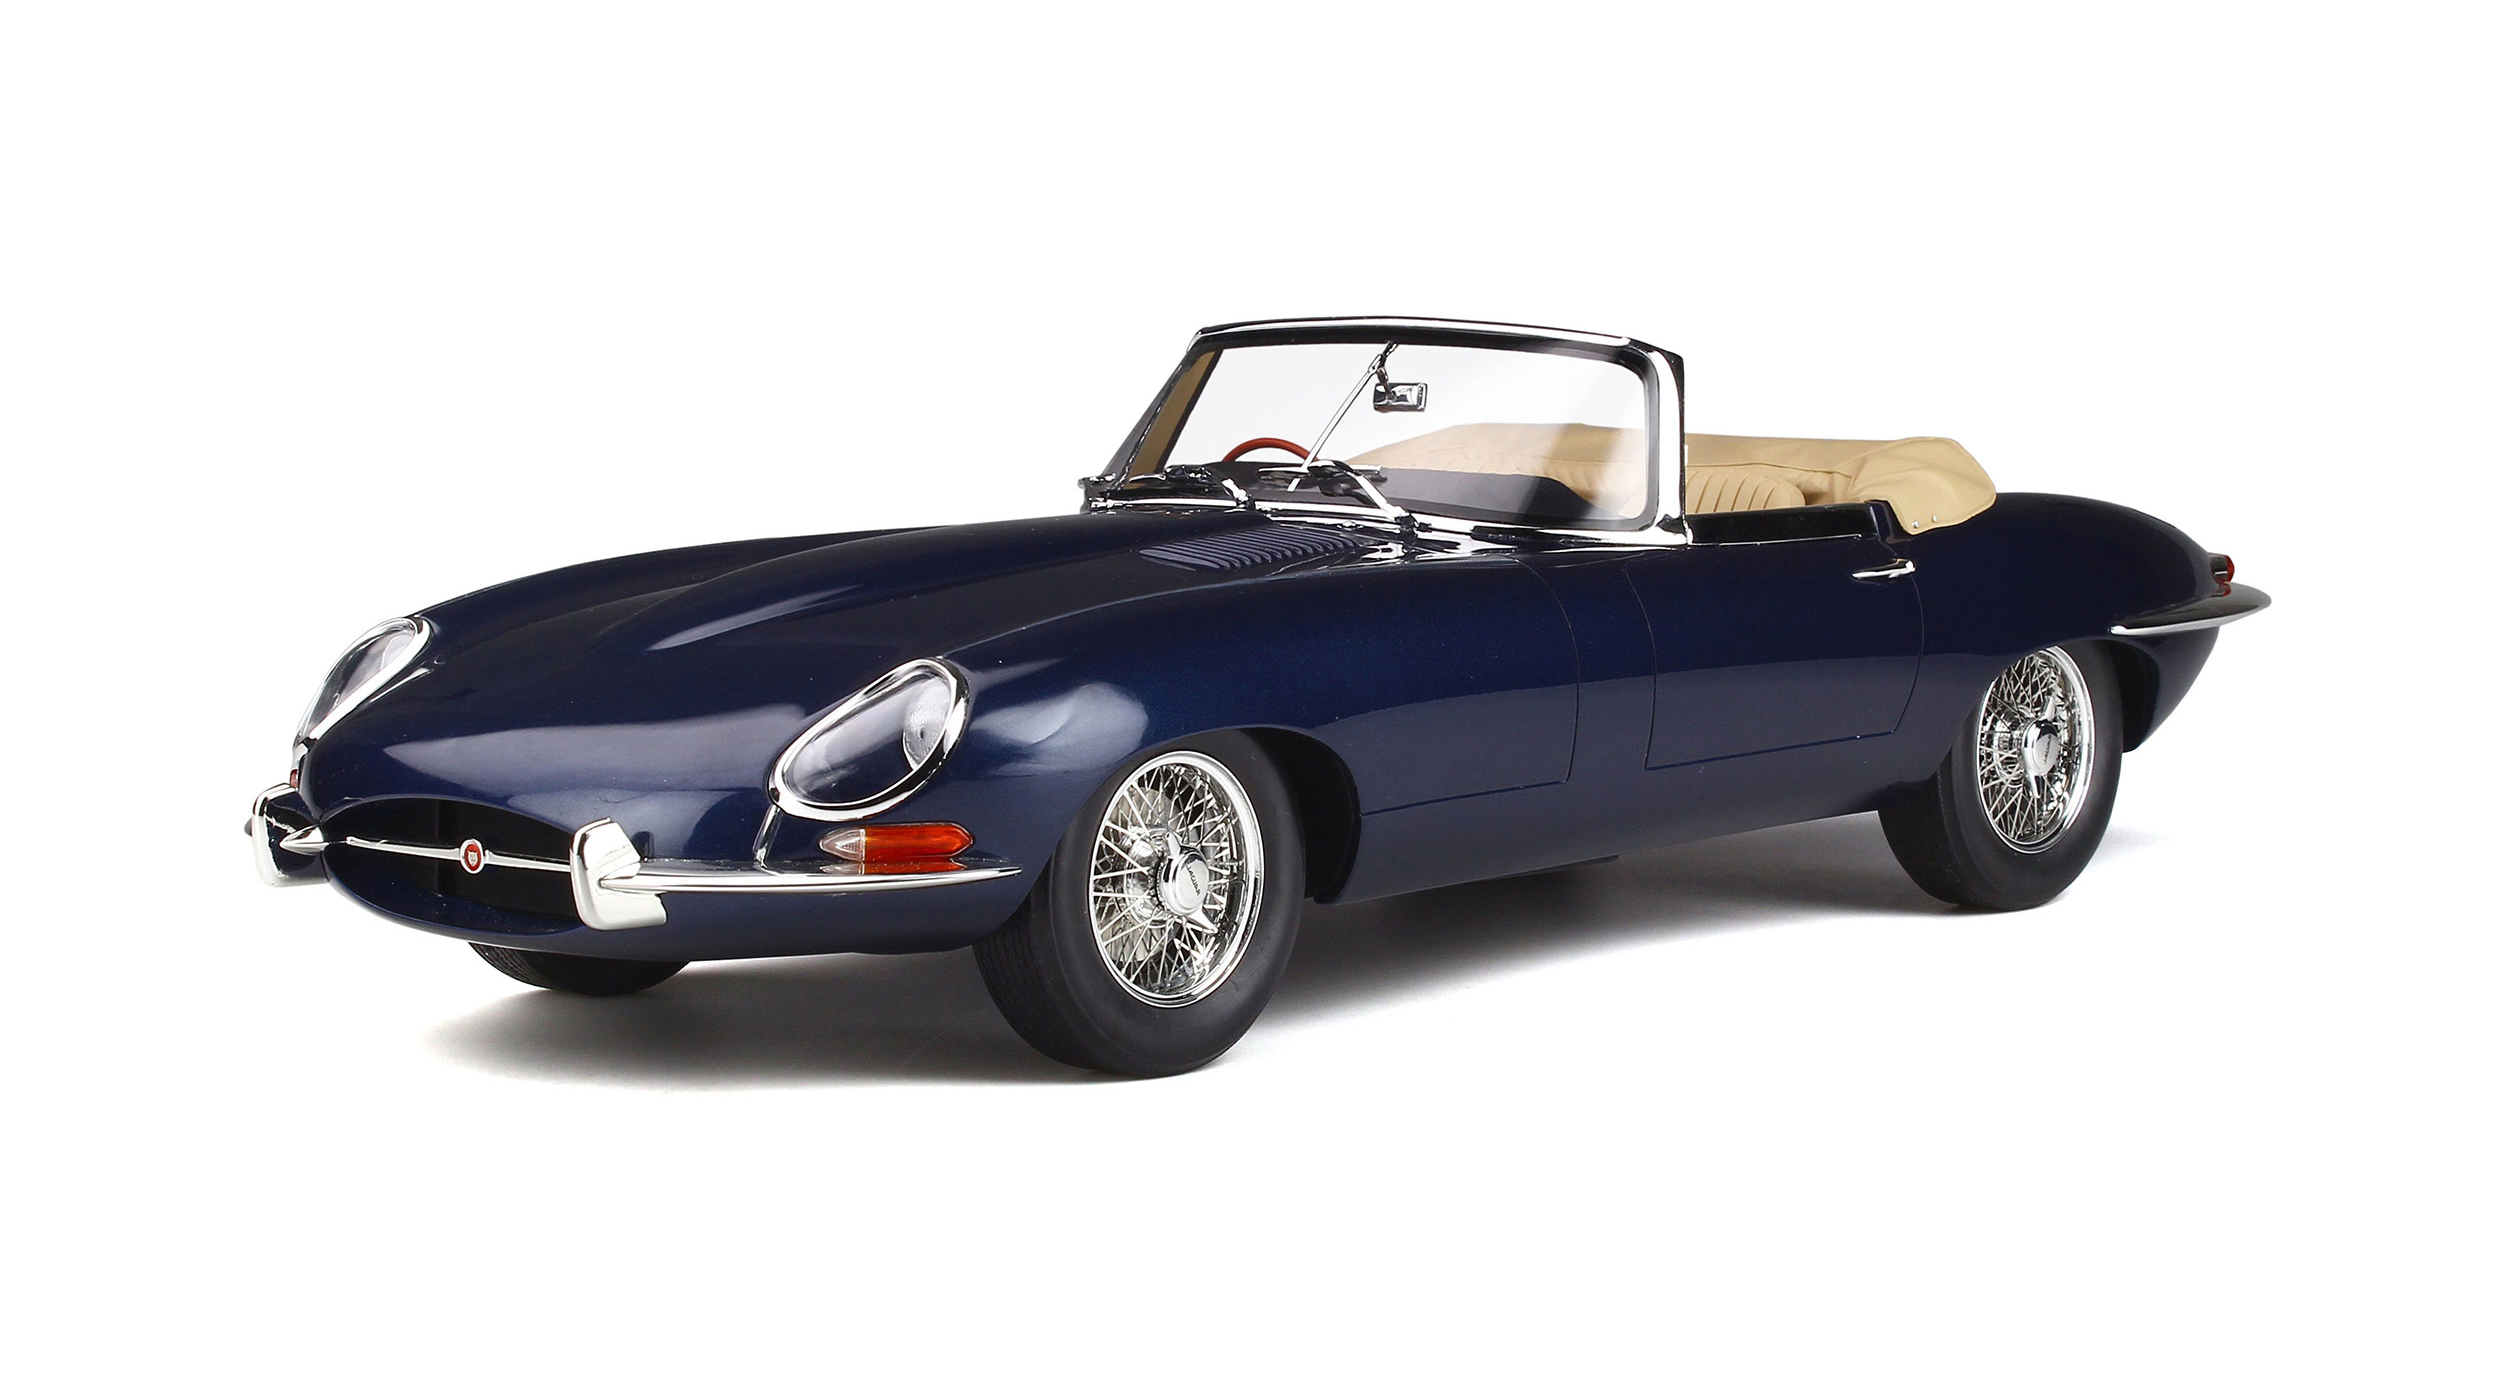 Jaguar E Type Roadster Rhd (right Hand Drive) Dark Blue Limited Edition To 500 Pieces Worldwide 1/12 Model Car By Gt Spirit